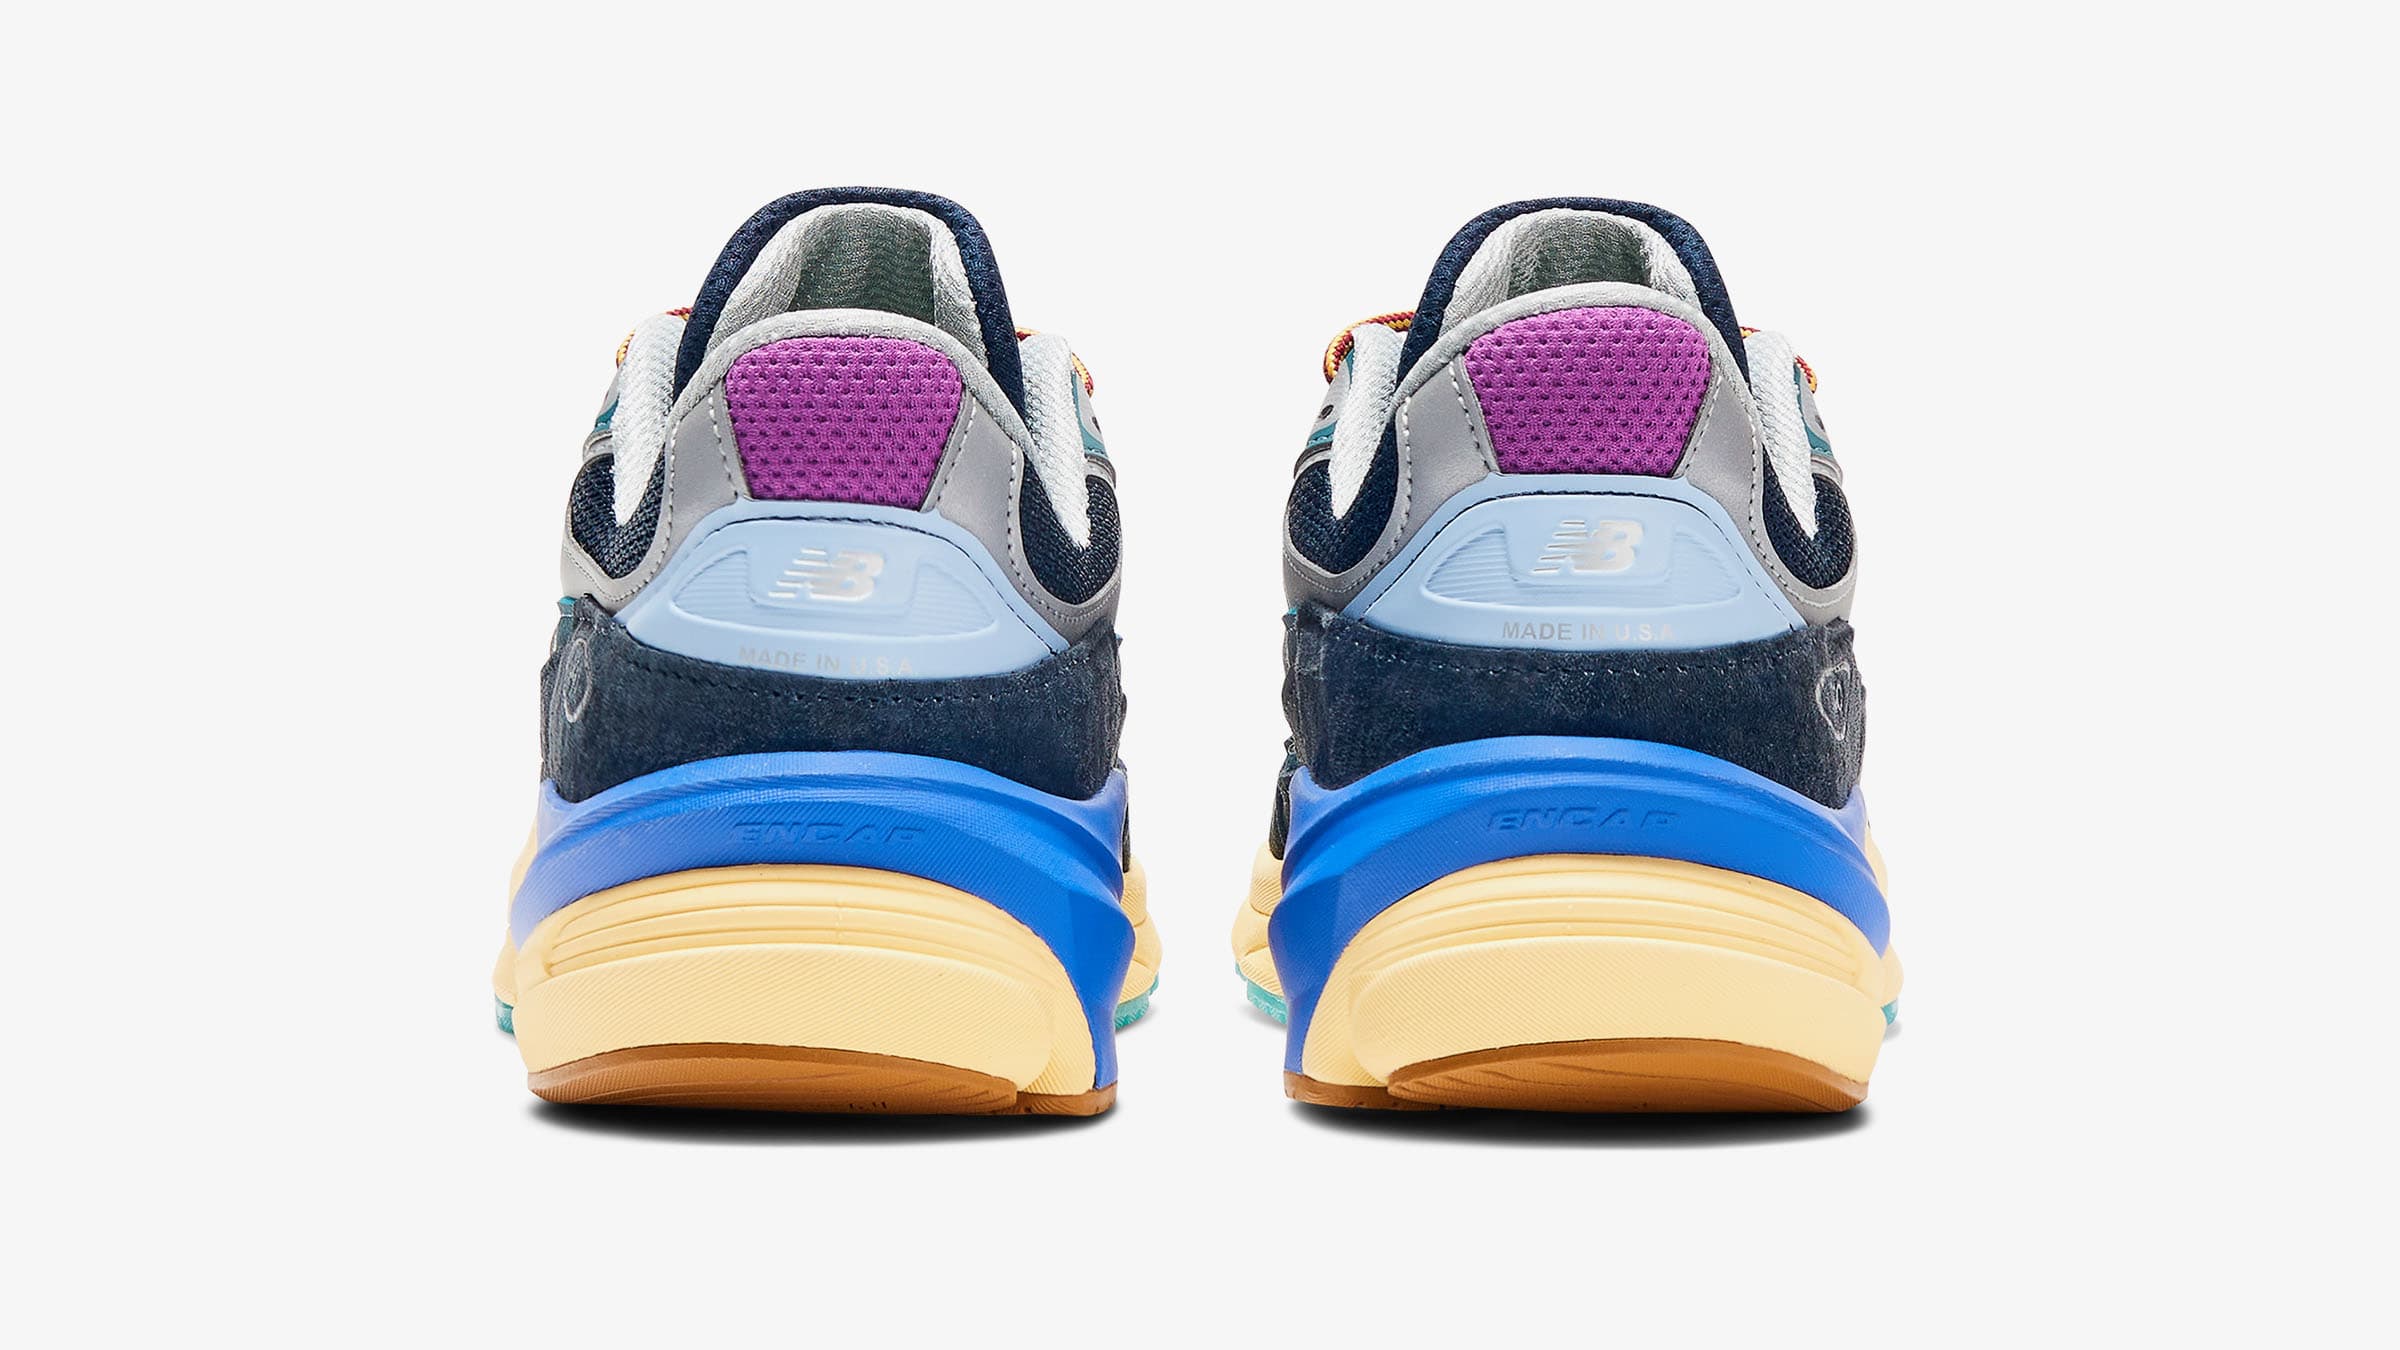 New Balance x Action Bronson 990V6 (Eclipse) | END. Launches